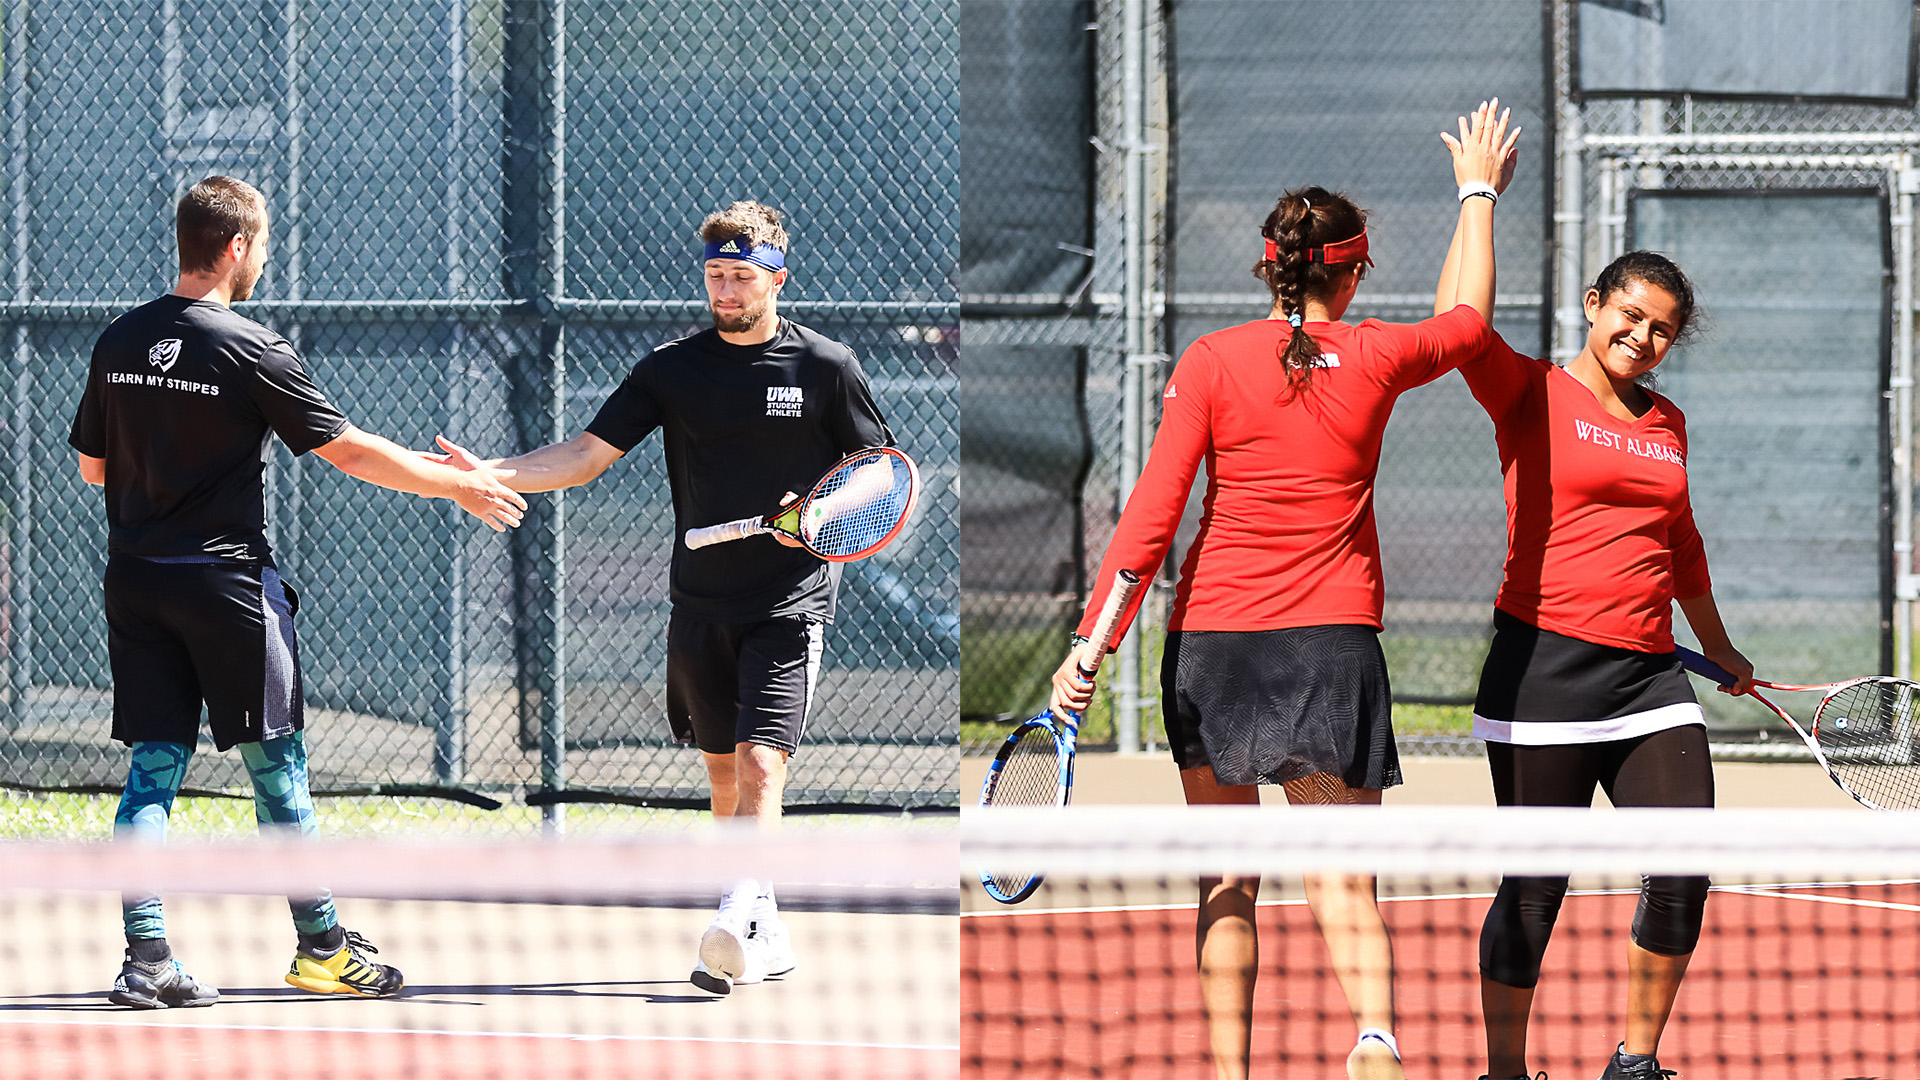 Tiger Tennis Sweeps Division I Alcorn State University Of West